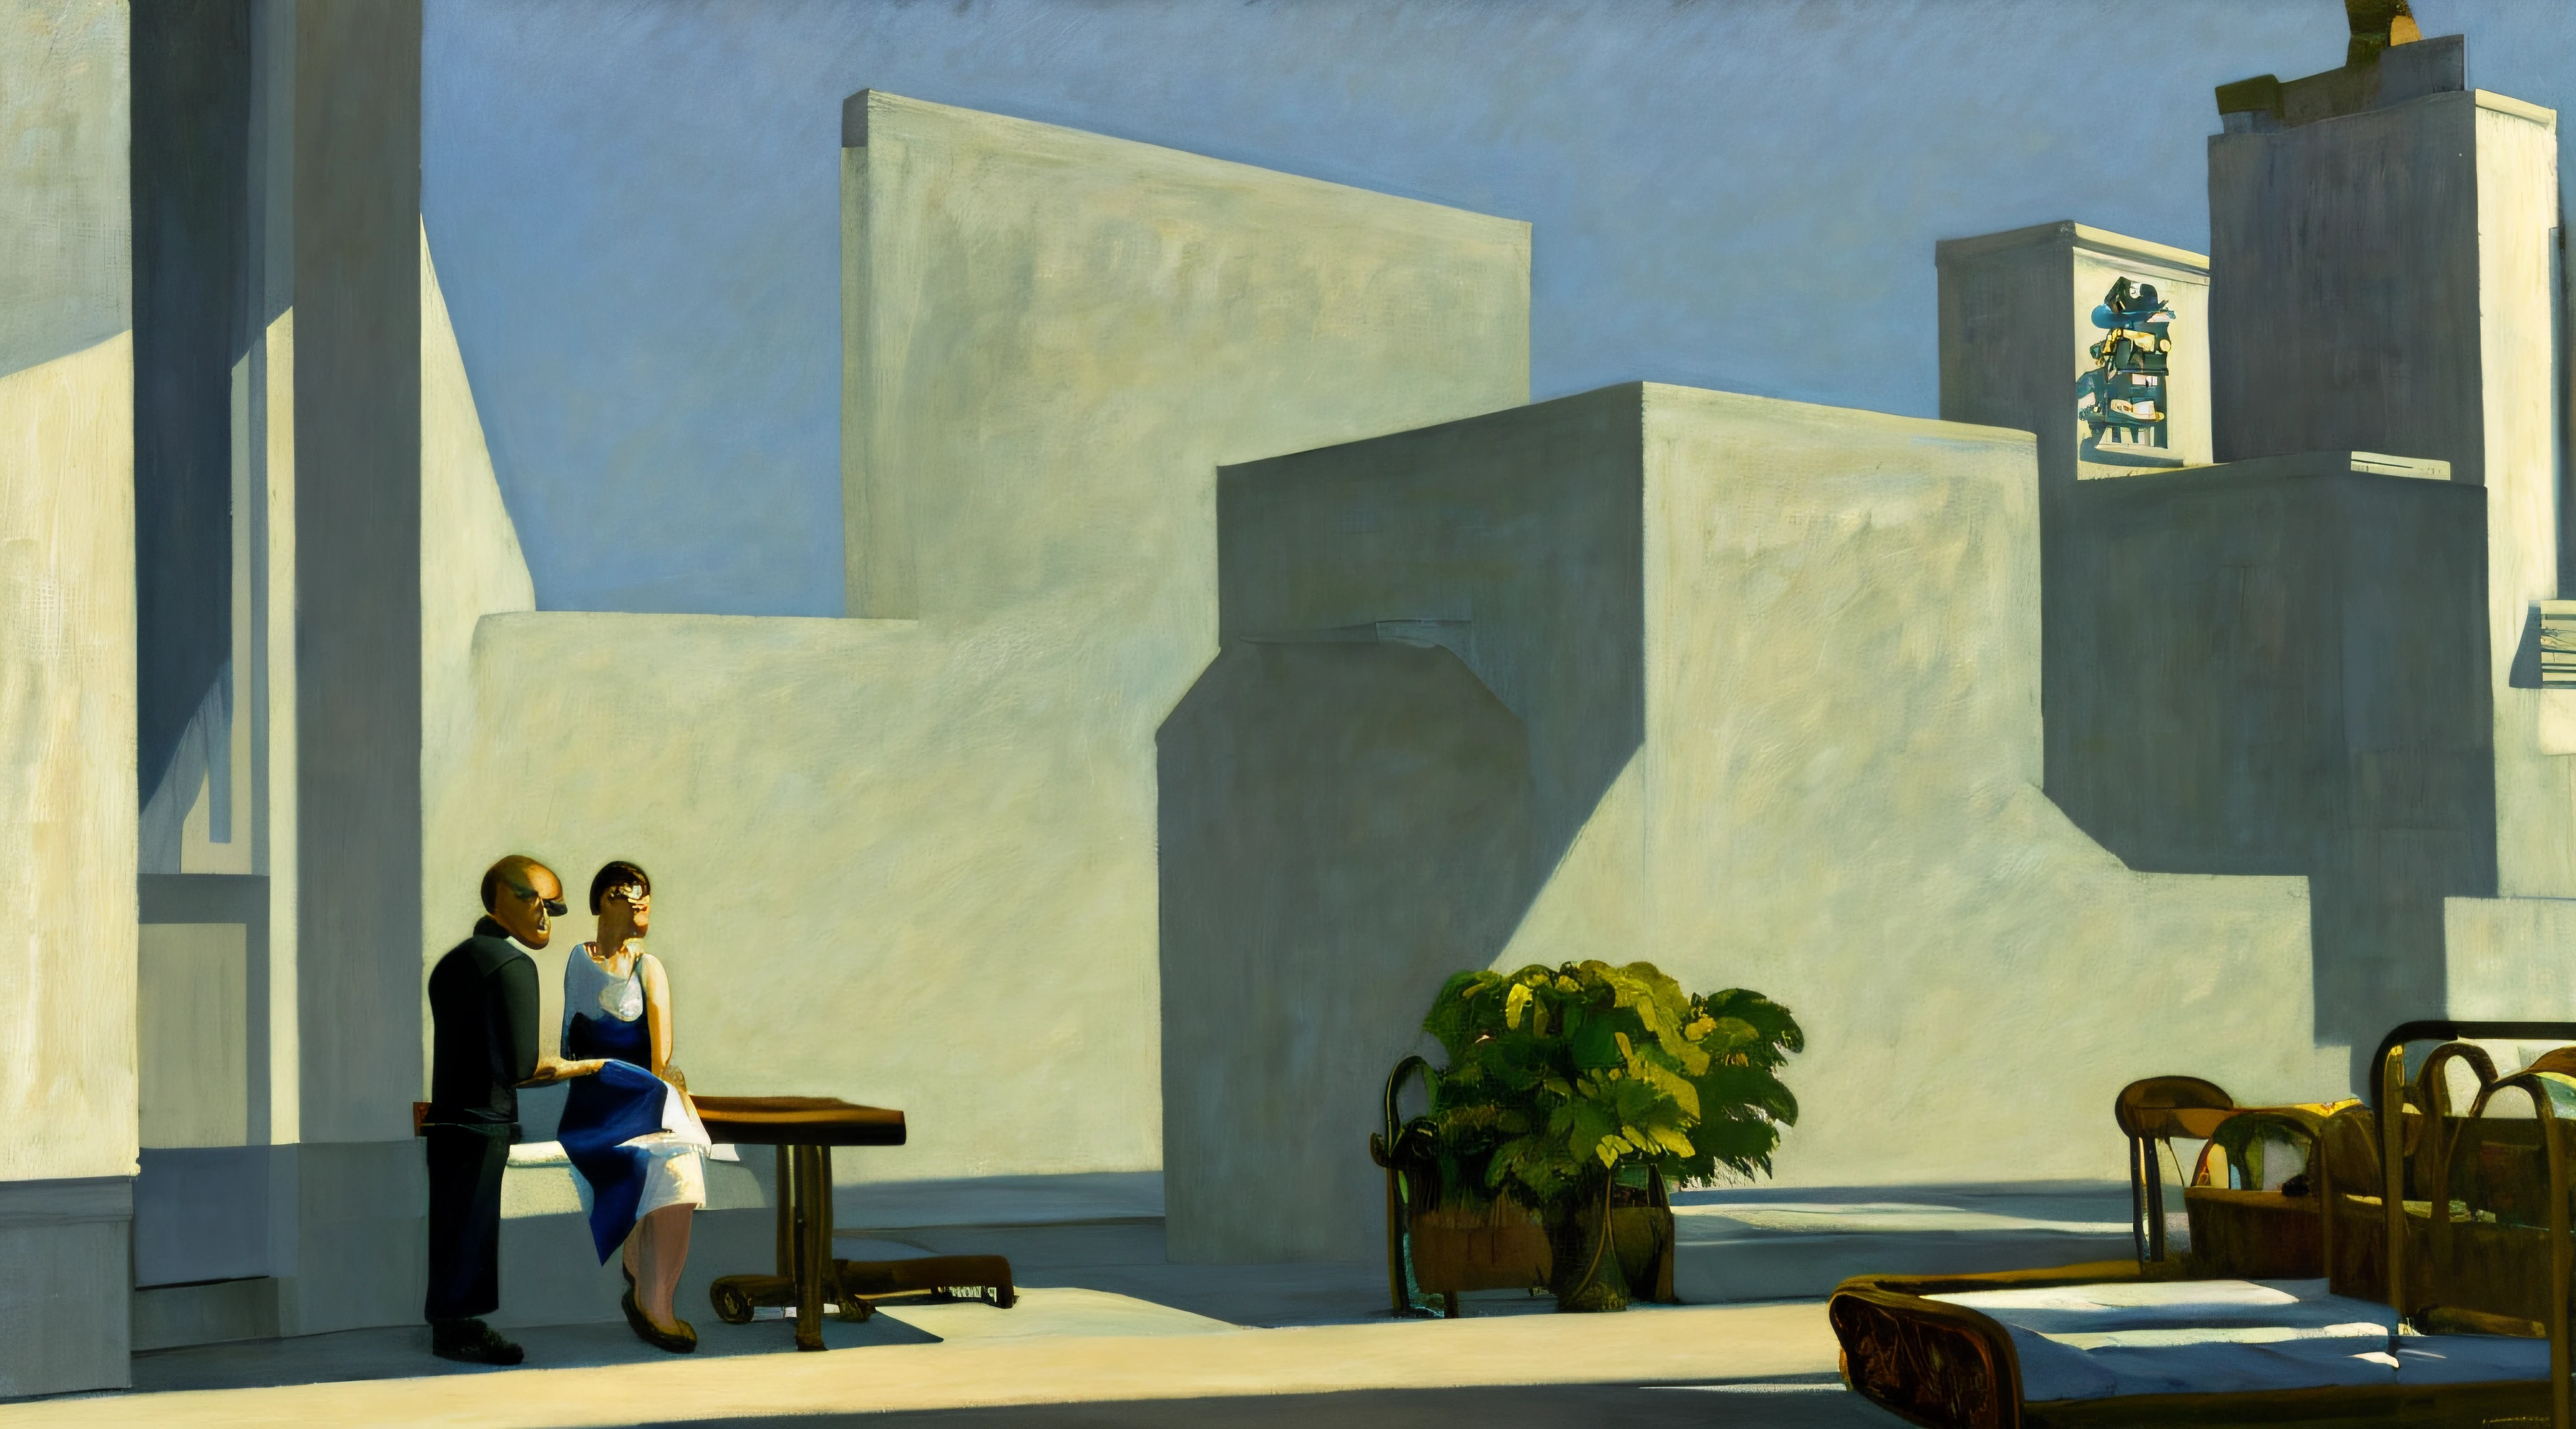 edhop_style, painting of a cityscape with a bench and a building in the background, ed hopper, style of edward hopper, edward hopper painting, ( ( ( edward hopper ) ) ), charles sheeler, edward hopper. sharp focus, by Rick Amor, by Edward Hopper, edward hopper vibe, edward hopper style, hopper, inspired by Rick Amor, raphael hopper